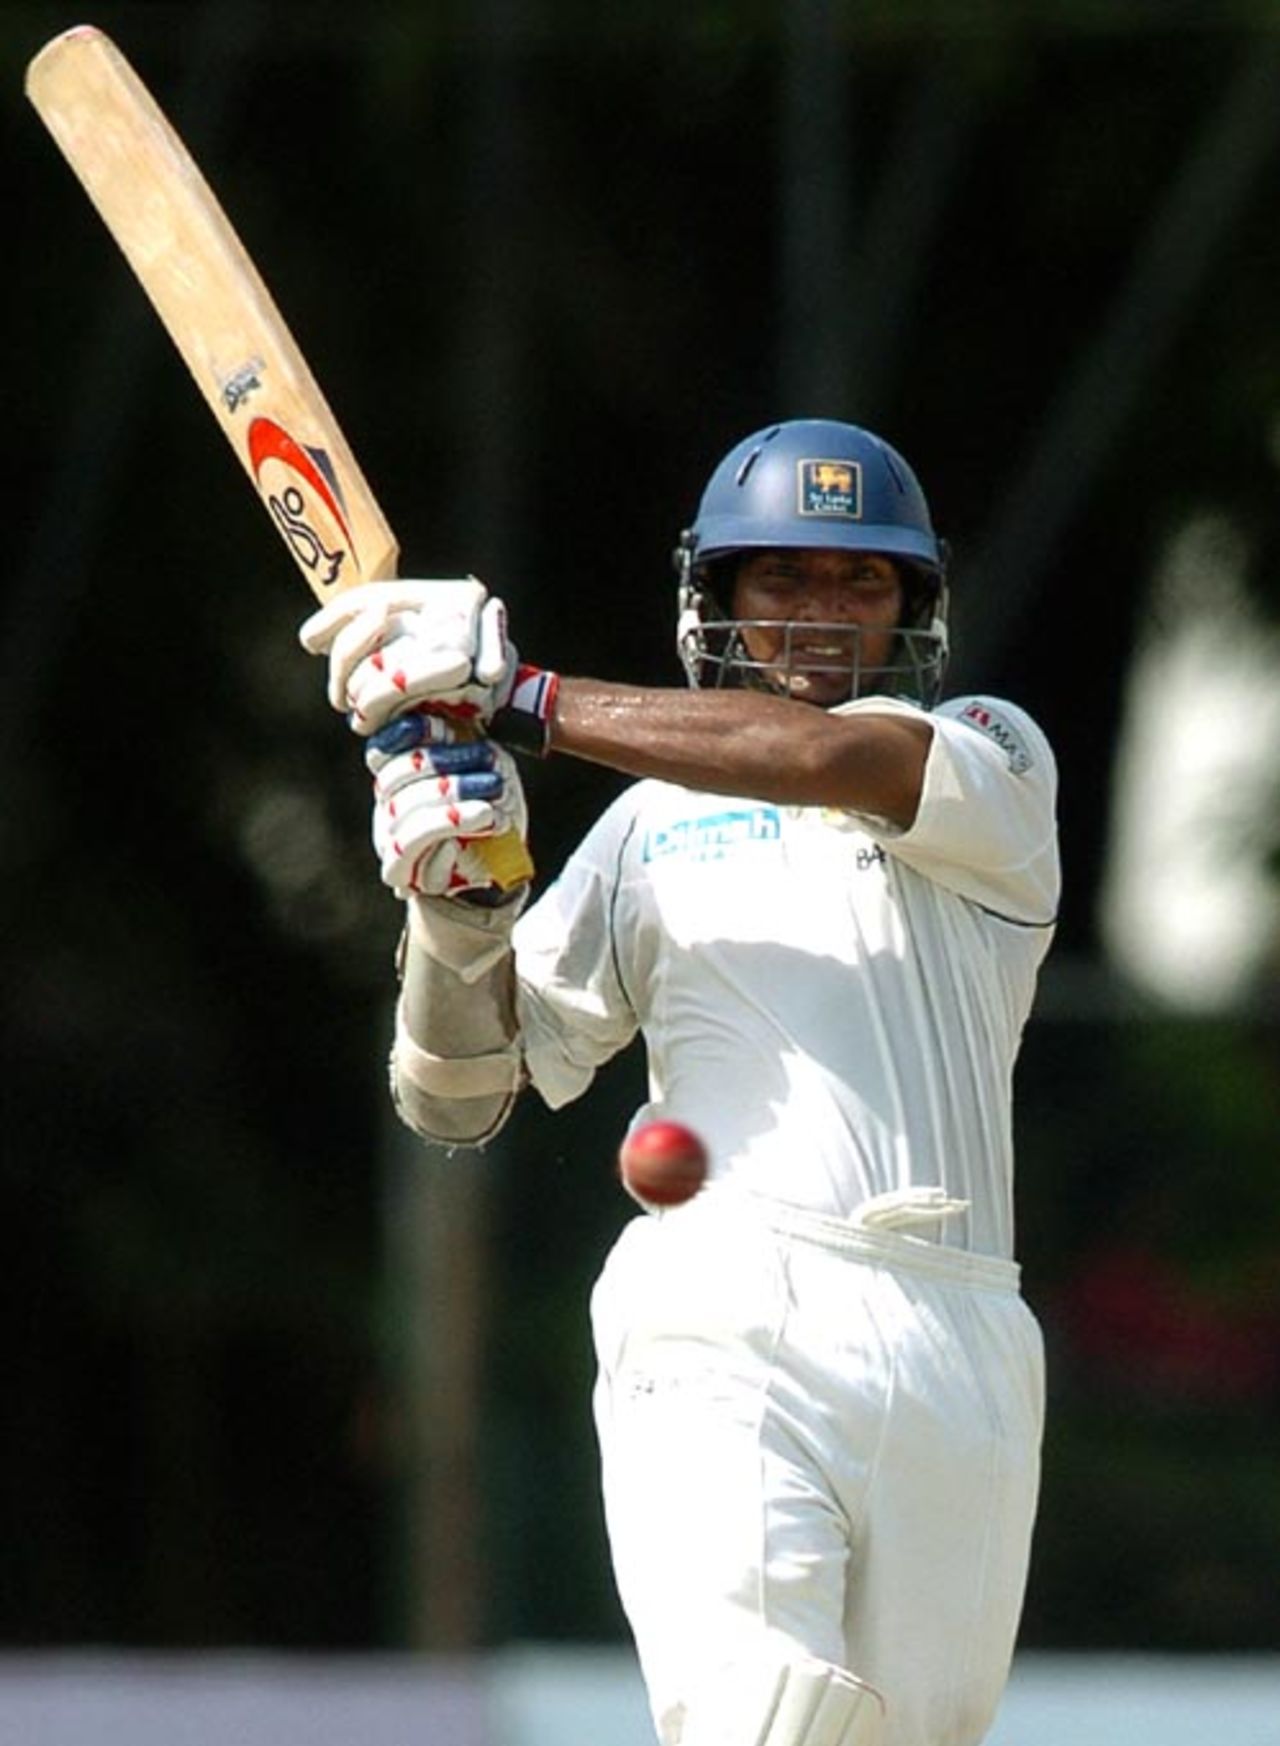 Kumar Sangakkara played some meaty pull shots and also completed his fifth double hundred, 2nd Test, P Saravanamuttu Stadium, Colombo, 2nd day, July 4, 2007